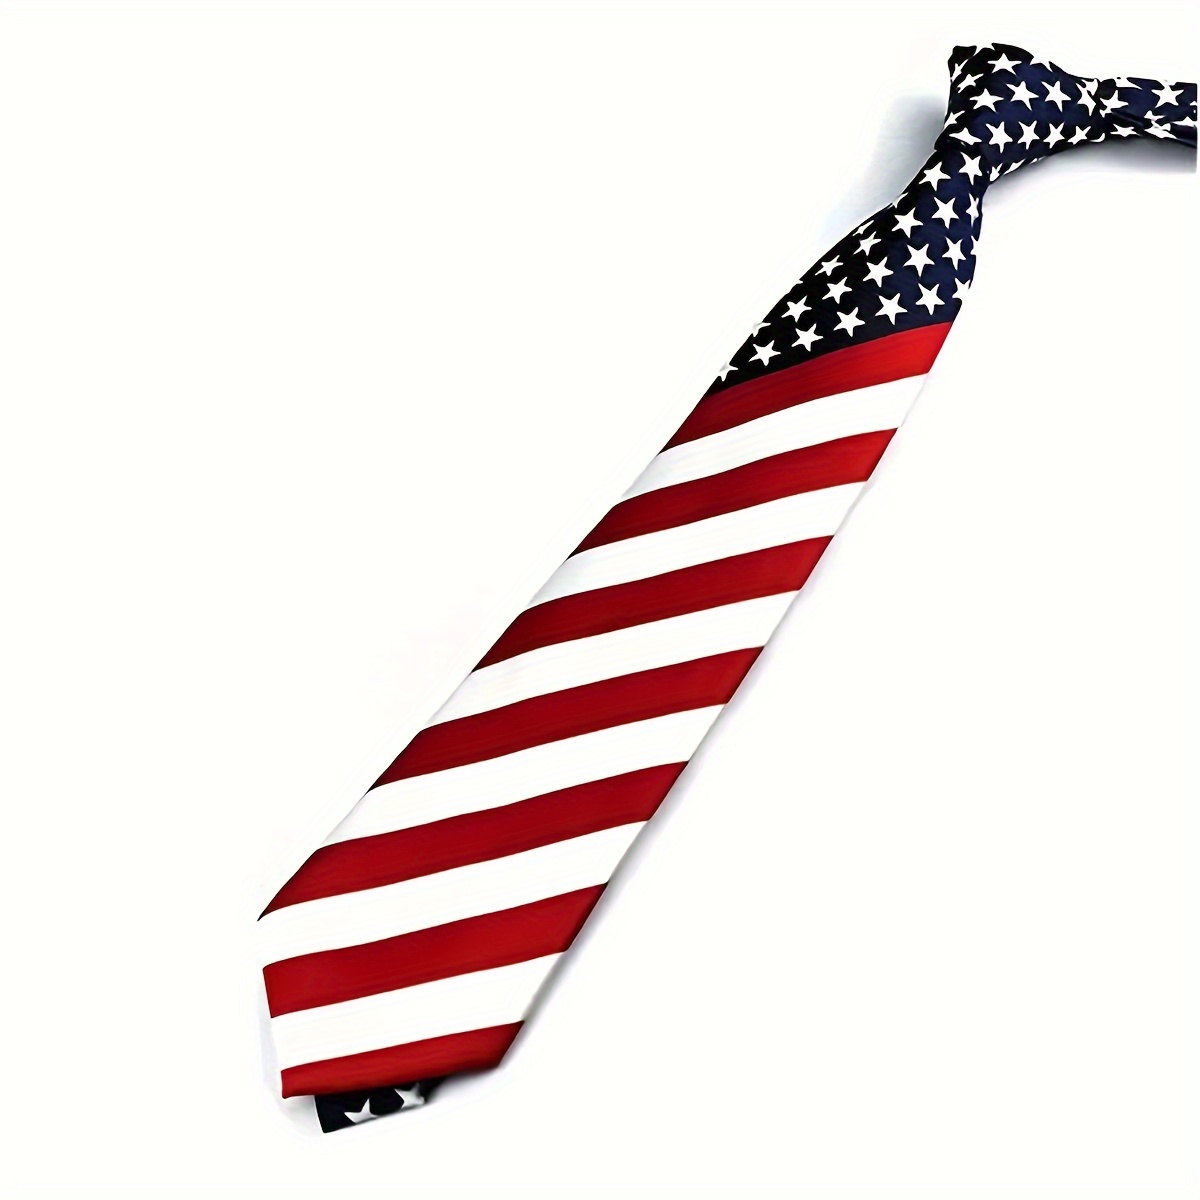 

1pc Men's Flag Star Stripe Tie, For Formal Occasions, Daily Life Work Business Meeting Suit Shirt